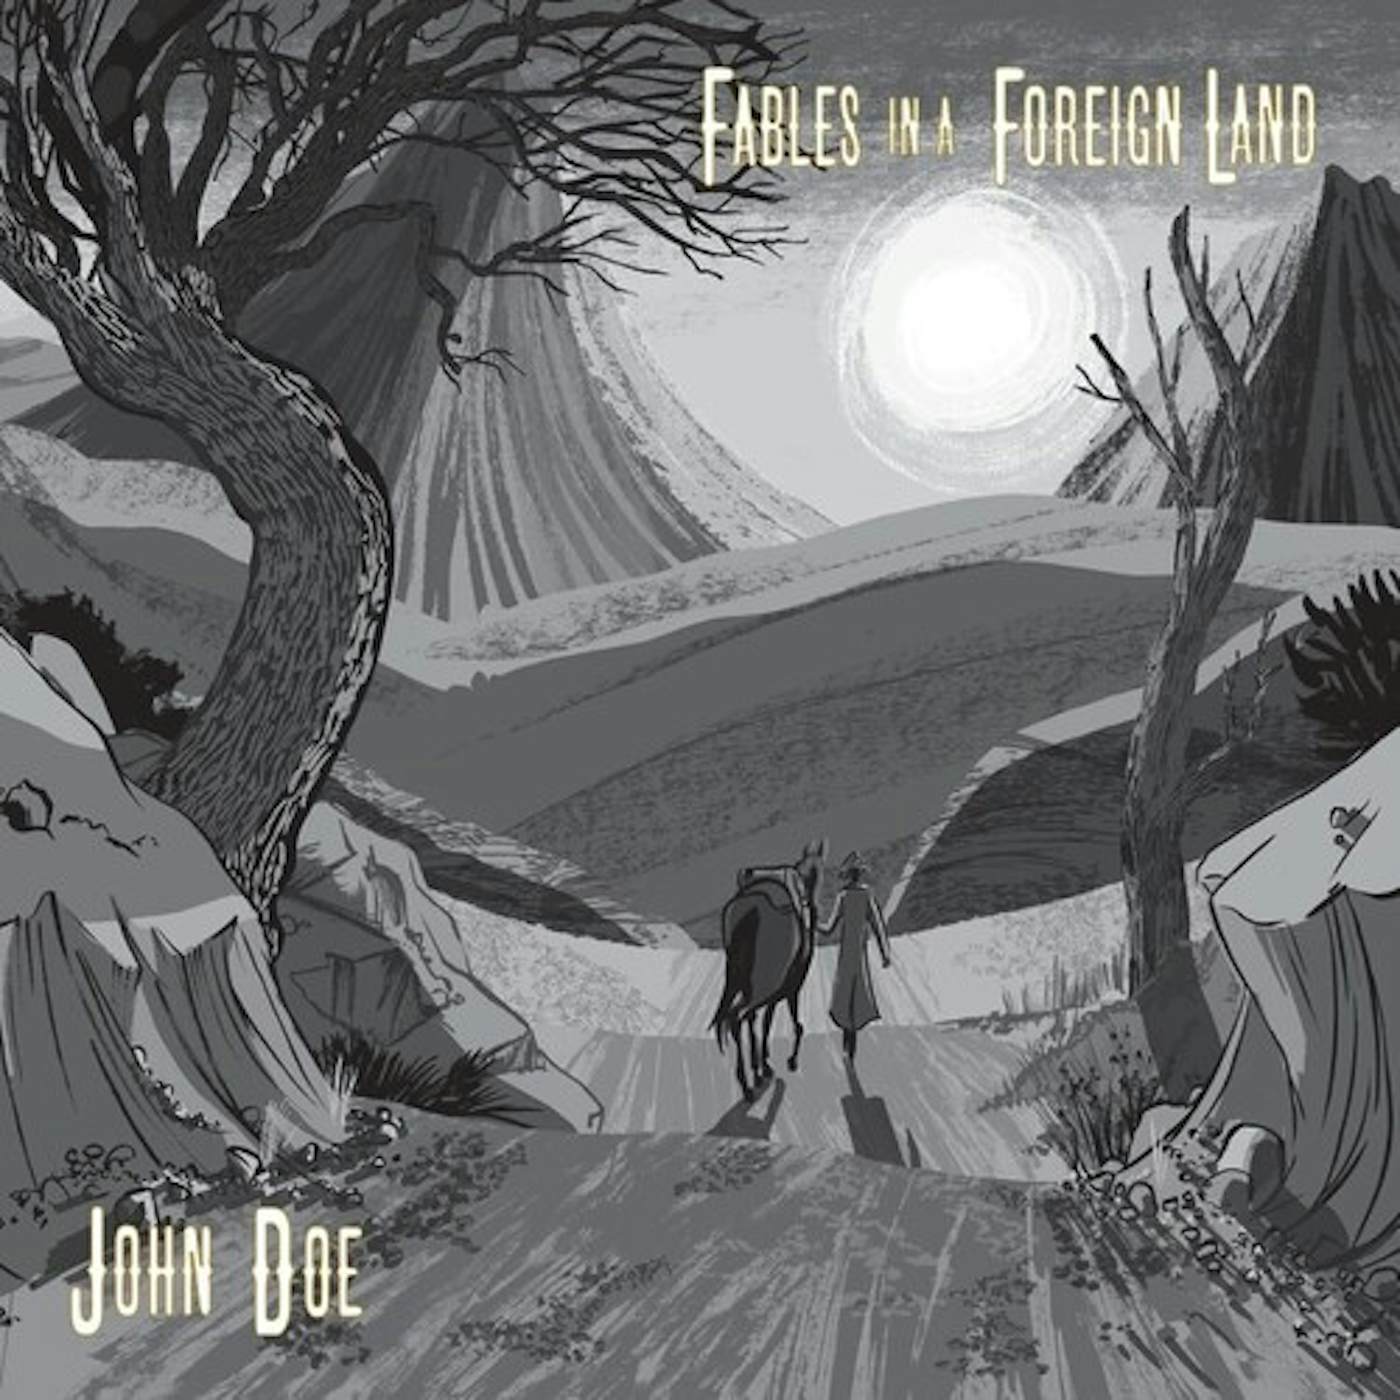 John Doe Fables in a Foreign Land Vinyl Record